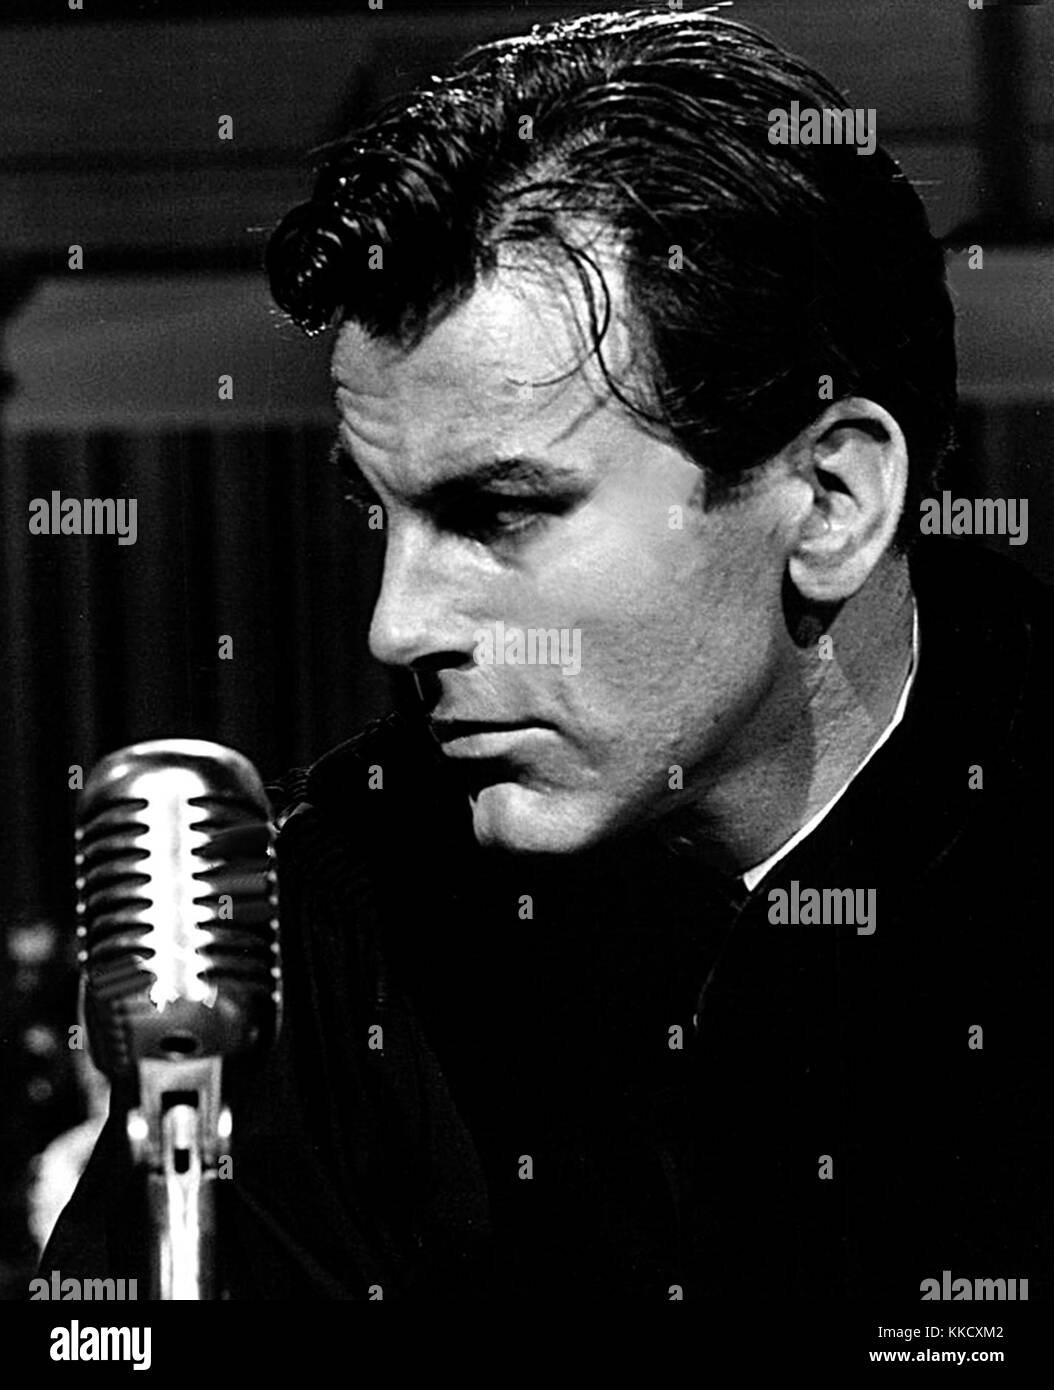 Maximilian schell Black and White Stock Photos & Images - Alamy